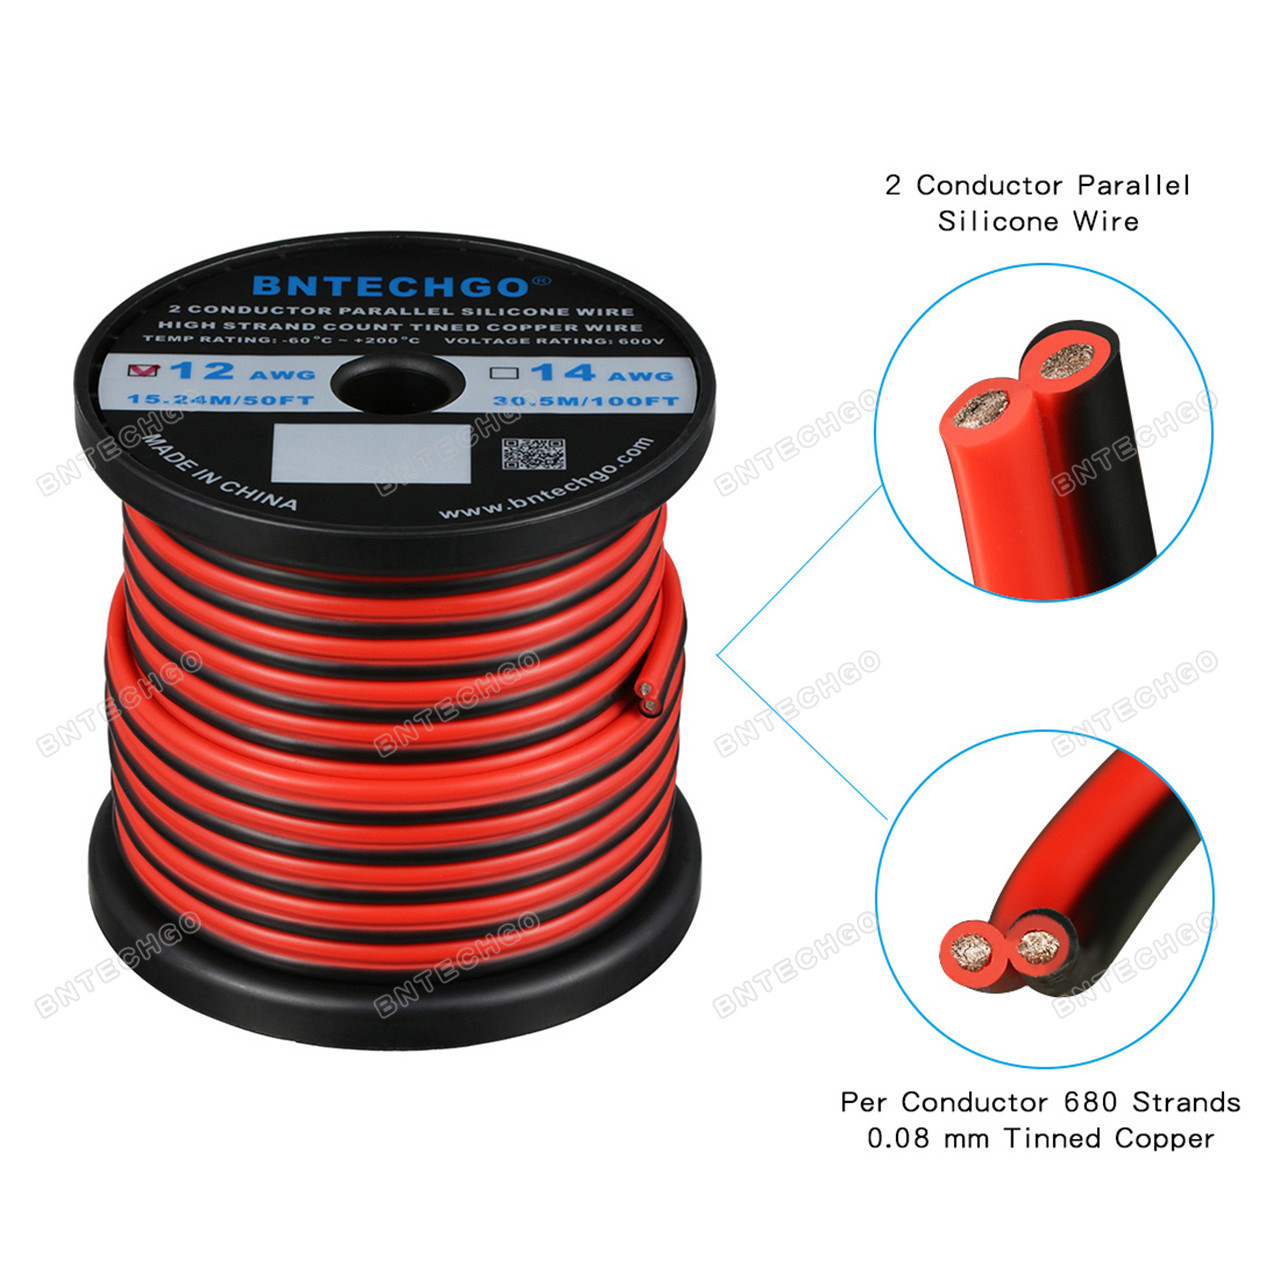 BNTECHGO 12 Gauge Flexible 2 Conductor Parallel Silicone Wire Spool Red  Black High Resistant 200 deg C 600V for Single Color LED Strip Extension  Cable